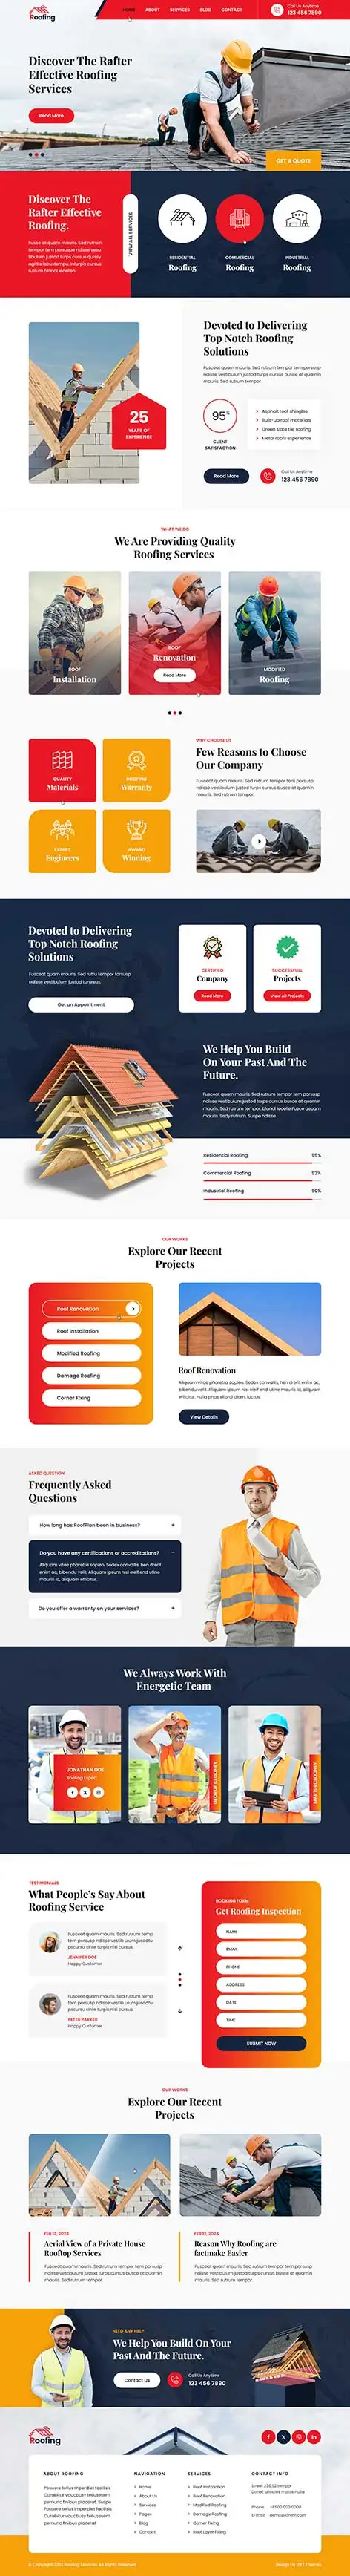 roofing services WordPress theme